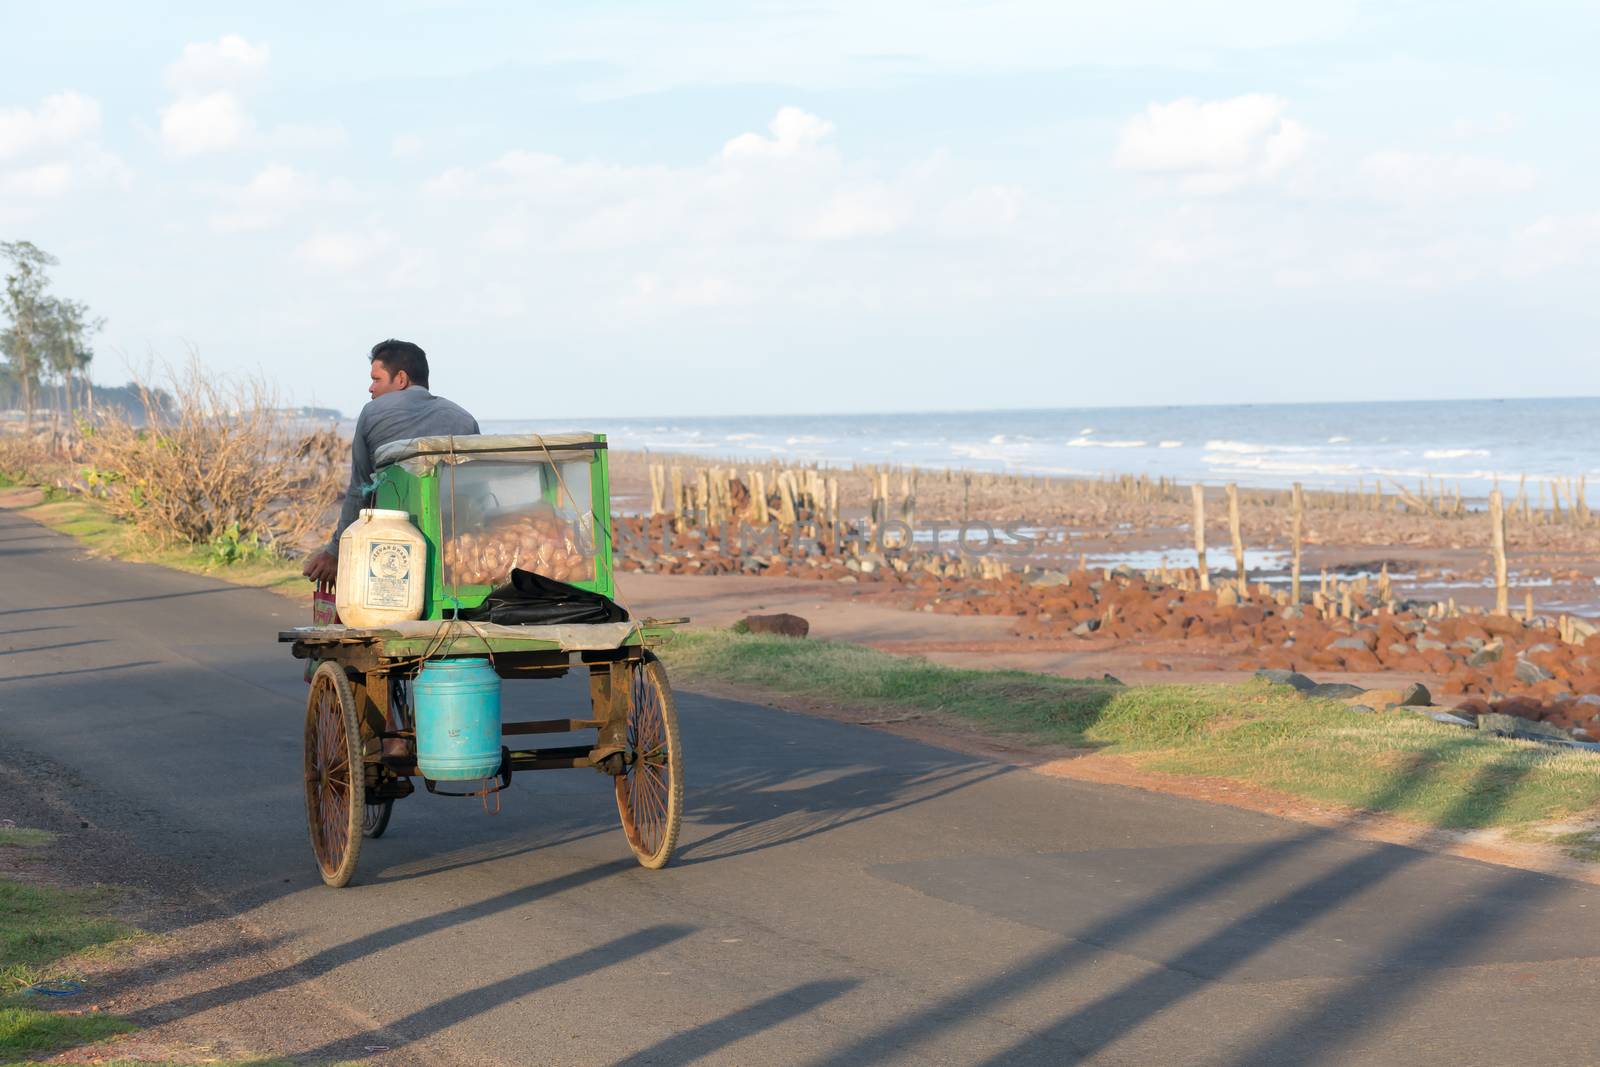 A rural local village mobile street food seller selling phuchka, gol gappa, chaat and pani puri on traditional cycle rickshaw van vehicle in coastal area beach road in summer sunset. India, May 2019 by sudiptabhowmick